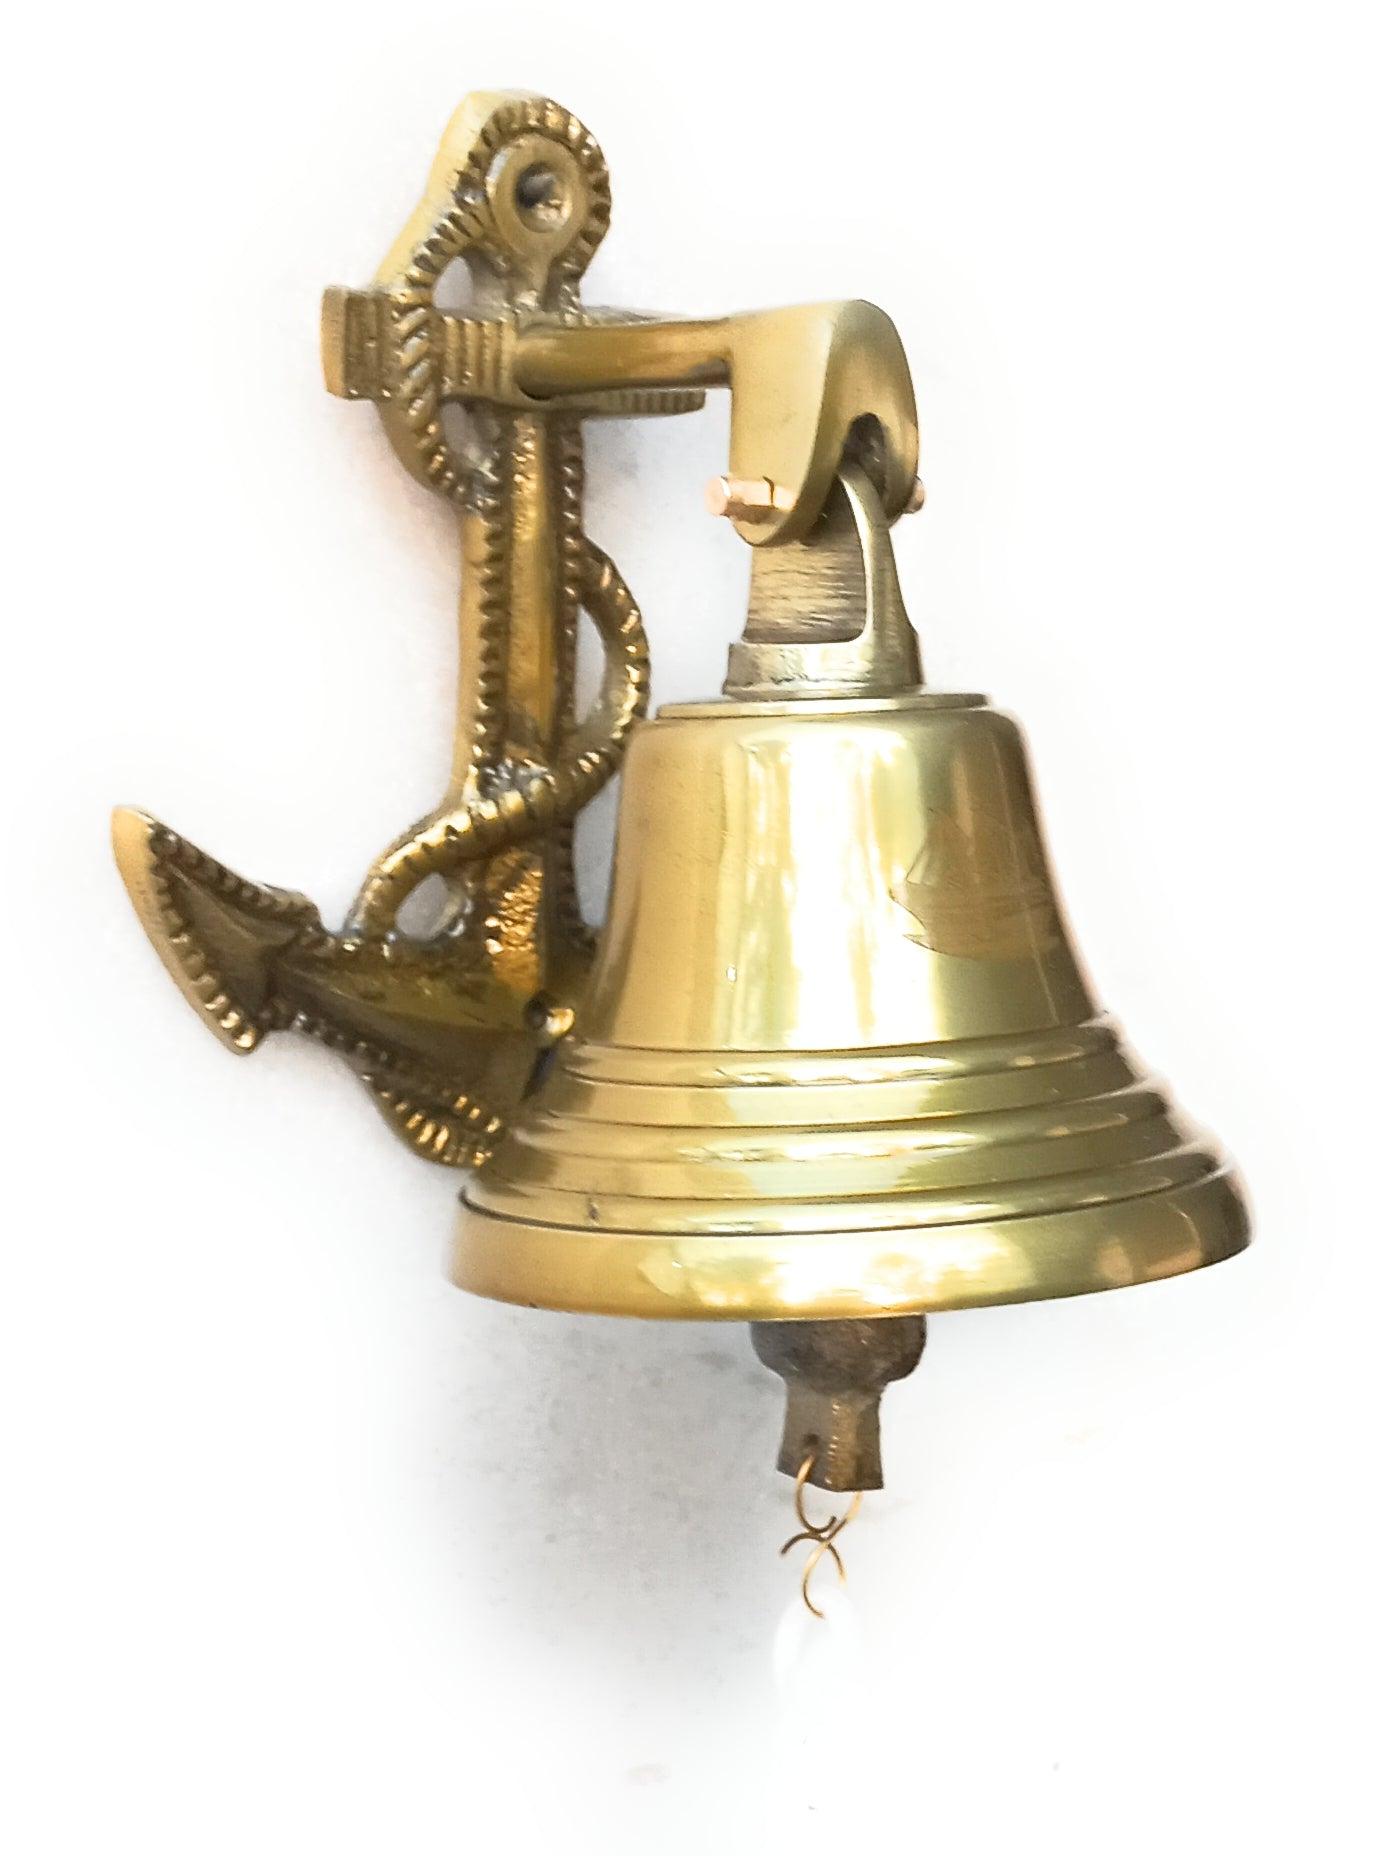 5-3/4 Solid Brass Anchor Hand Bell - Antique Vintage Style - Schooner Bay  Company